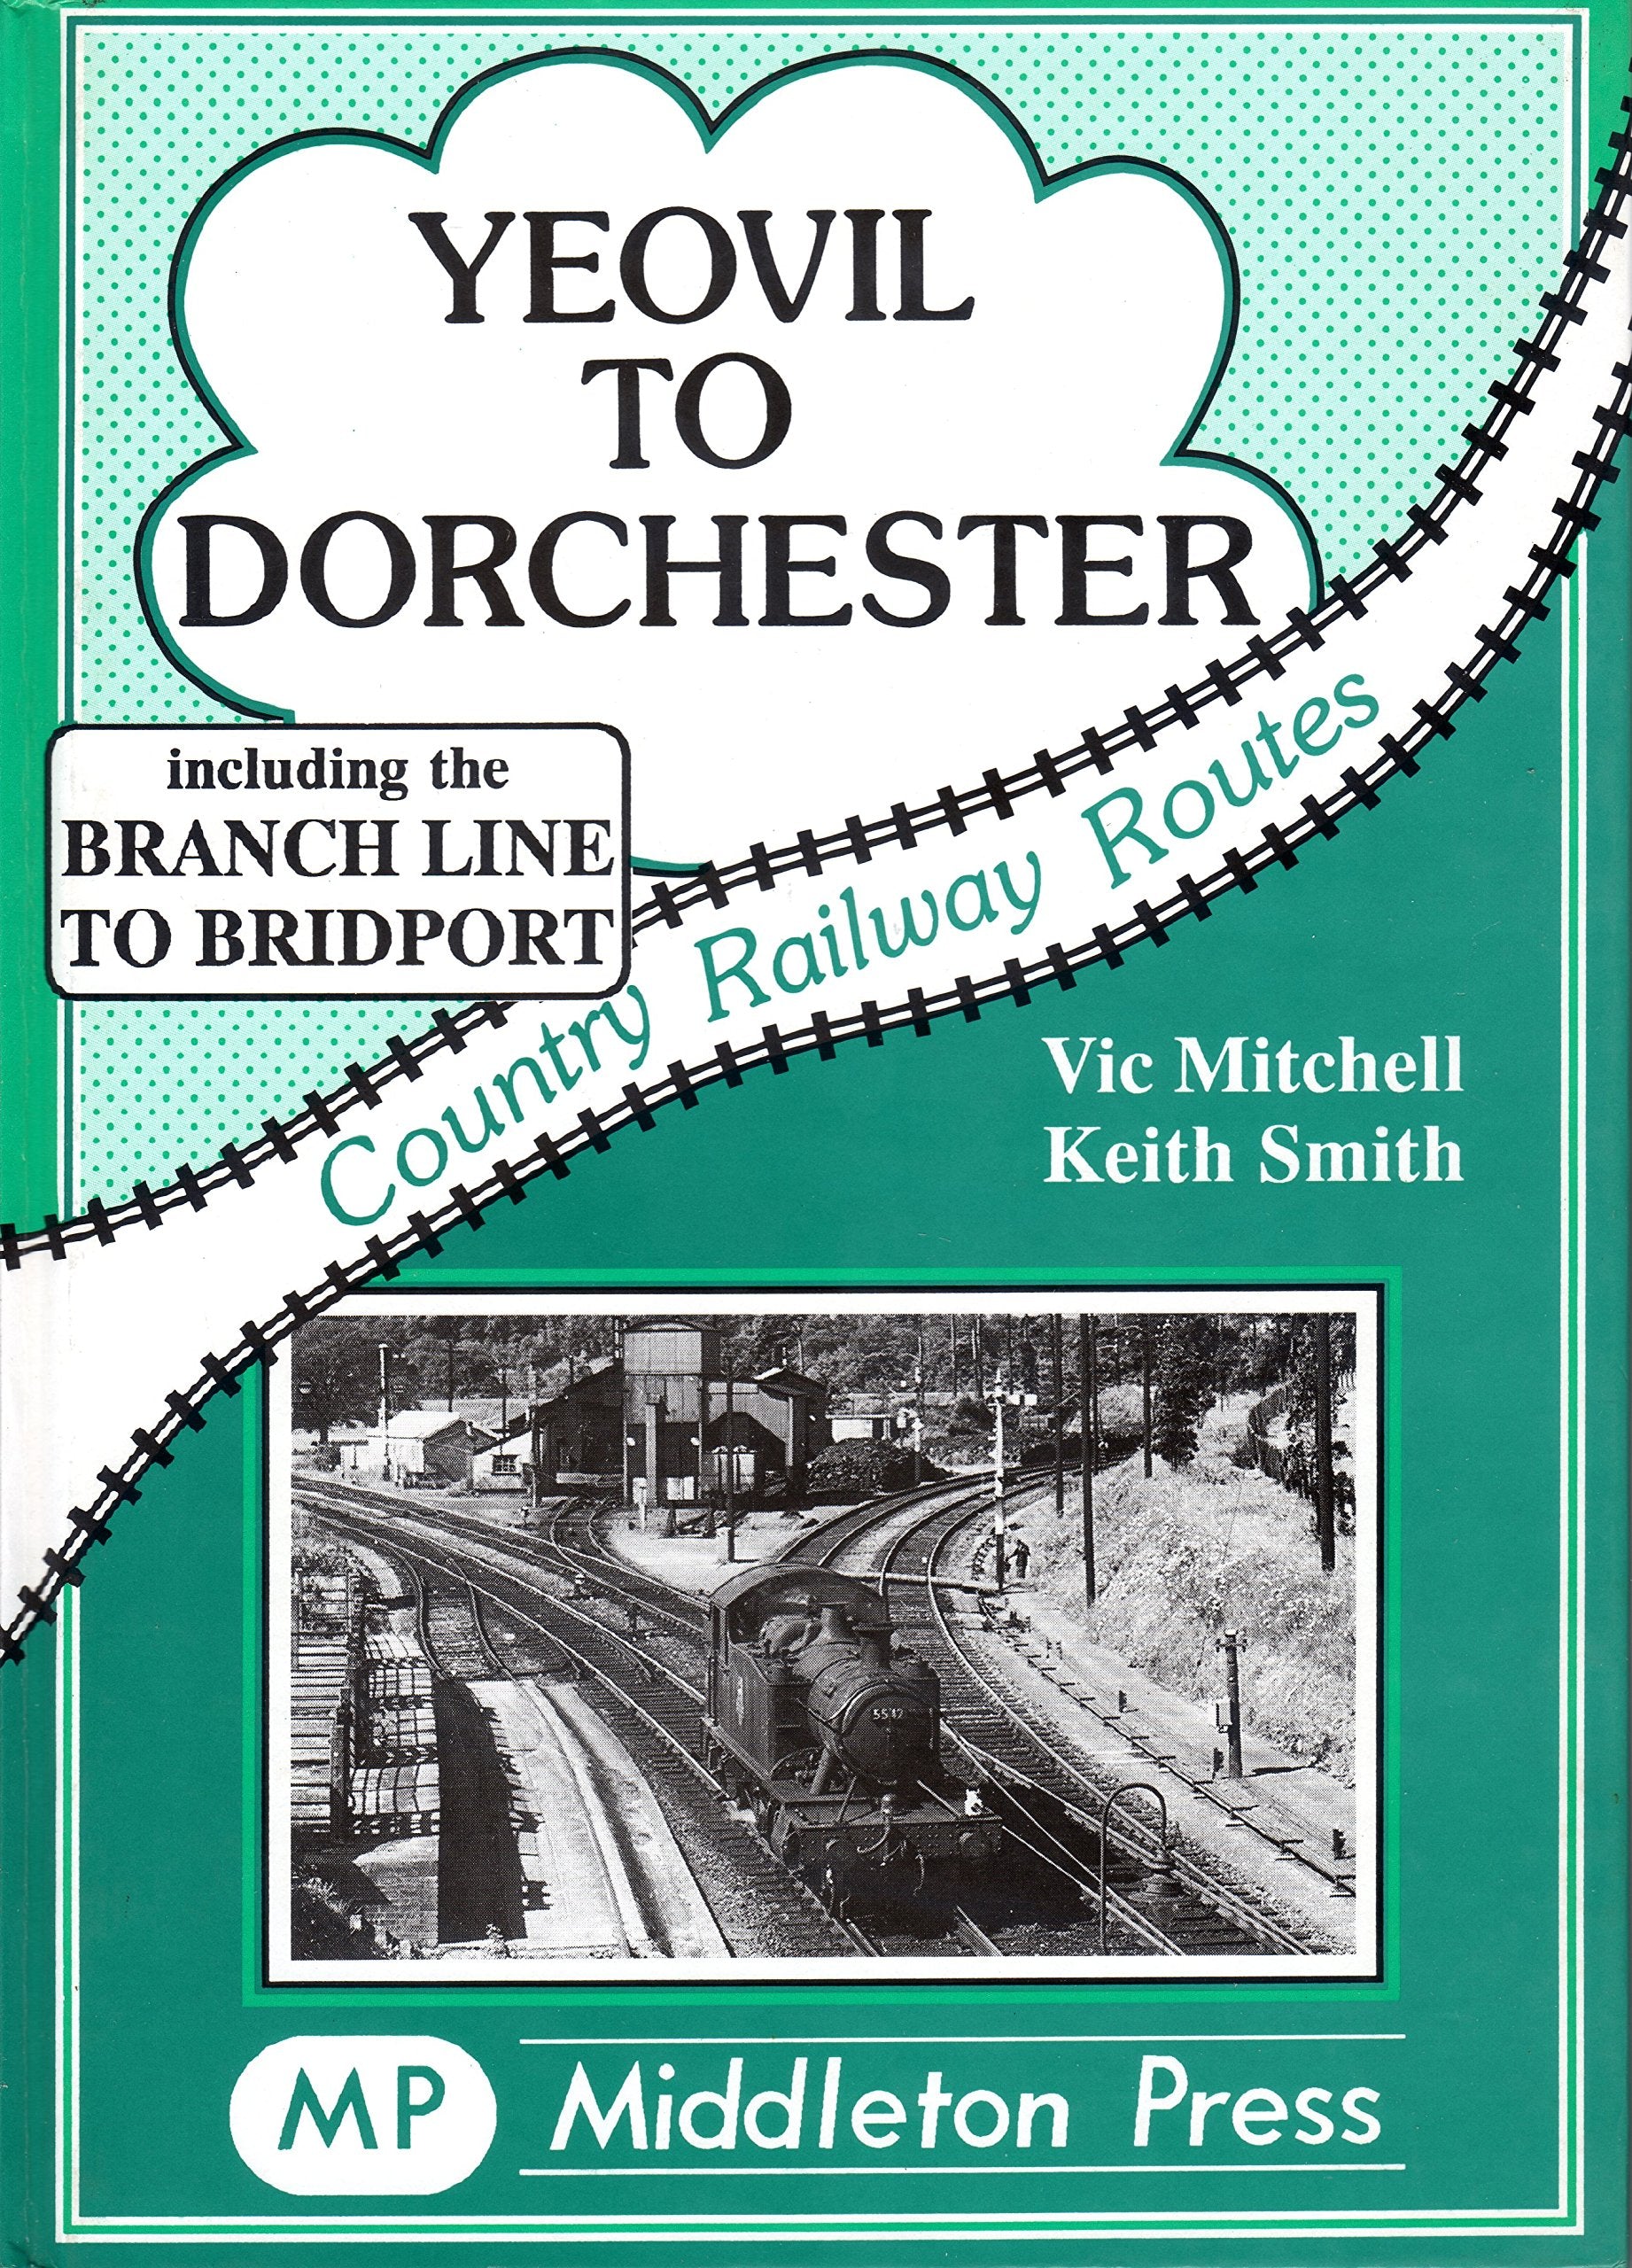 Country Railway Routes Yeovil to Dorchester including the Bridport Branch